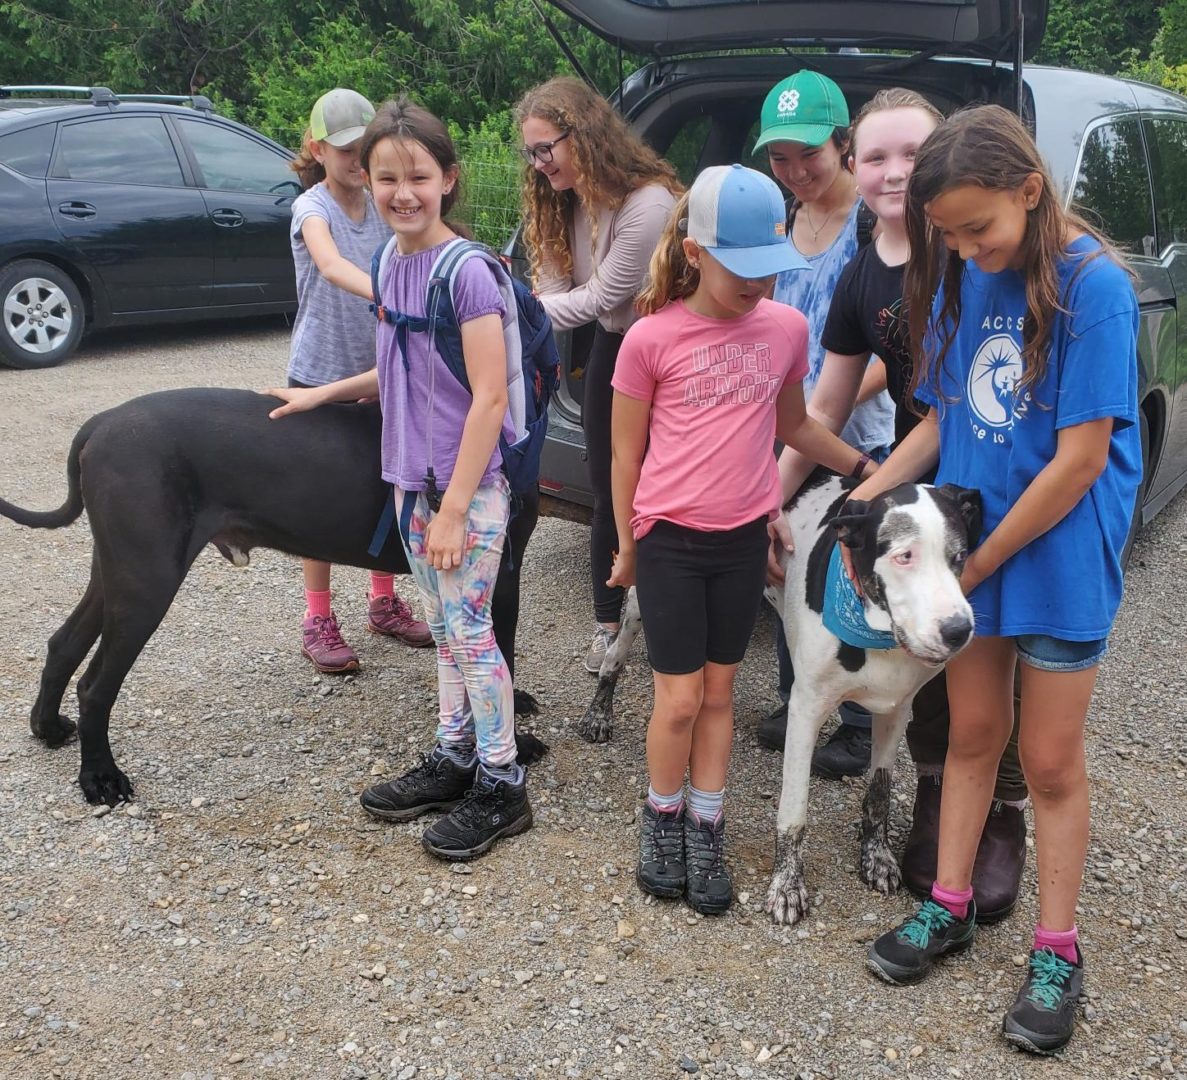 4-H Hiking members meeting new friends and encouraging them to join the 4-H canine club